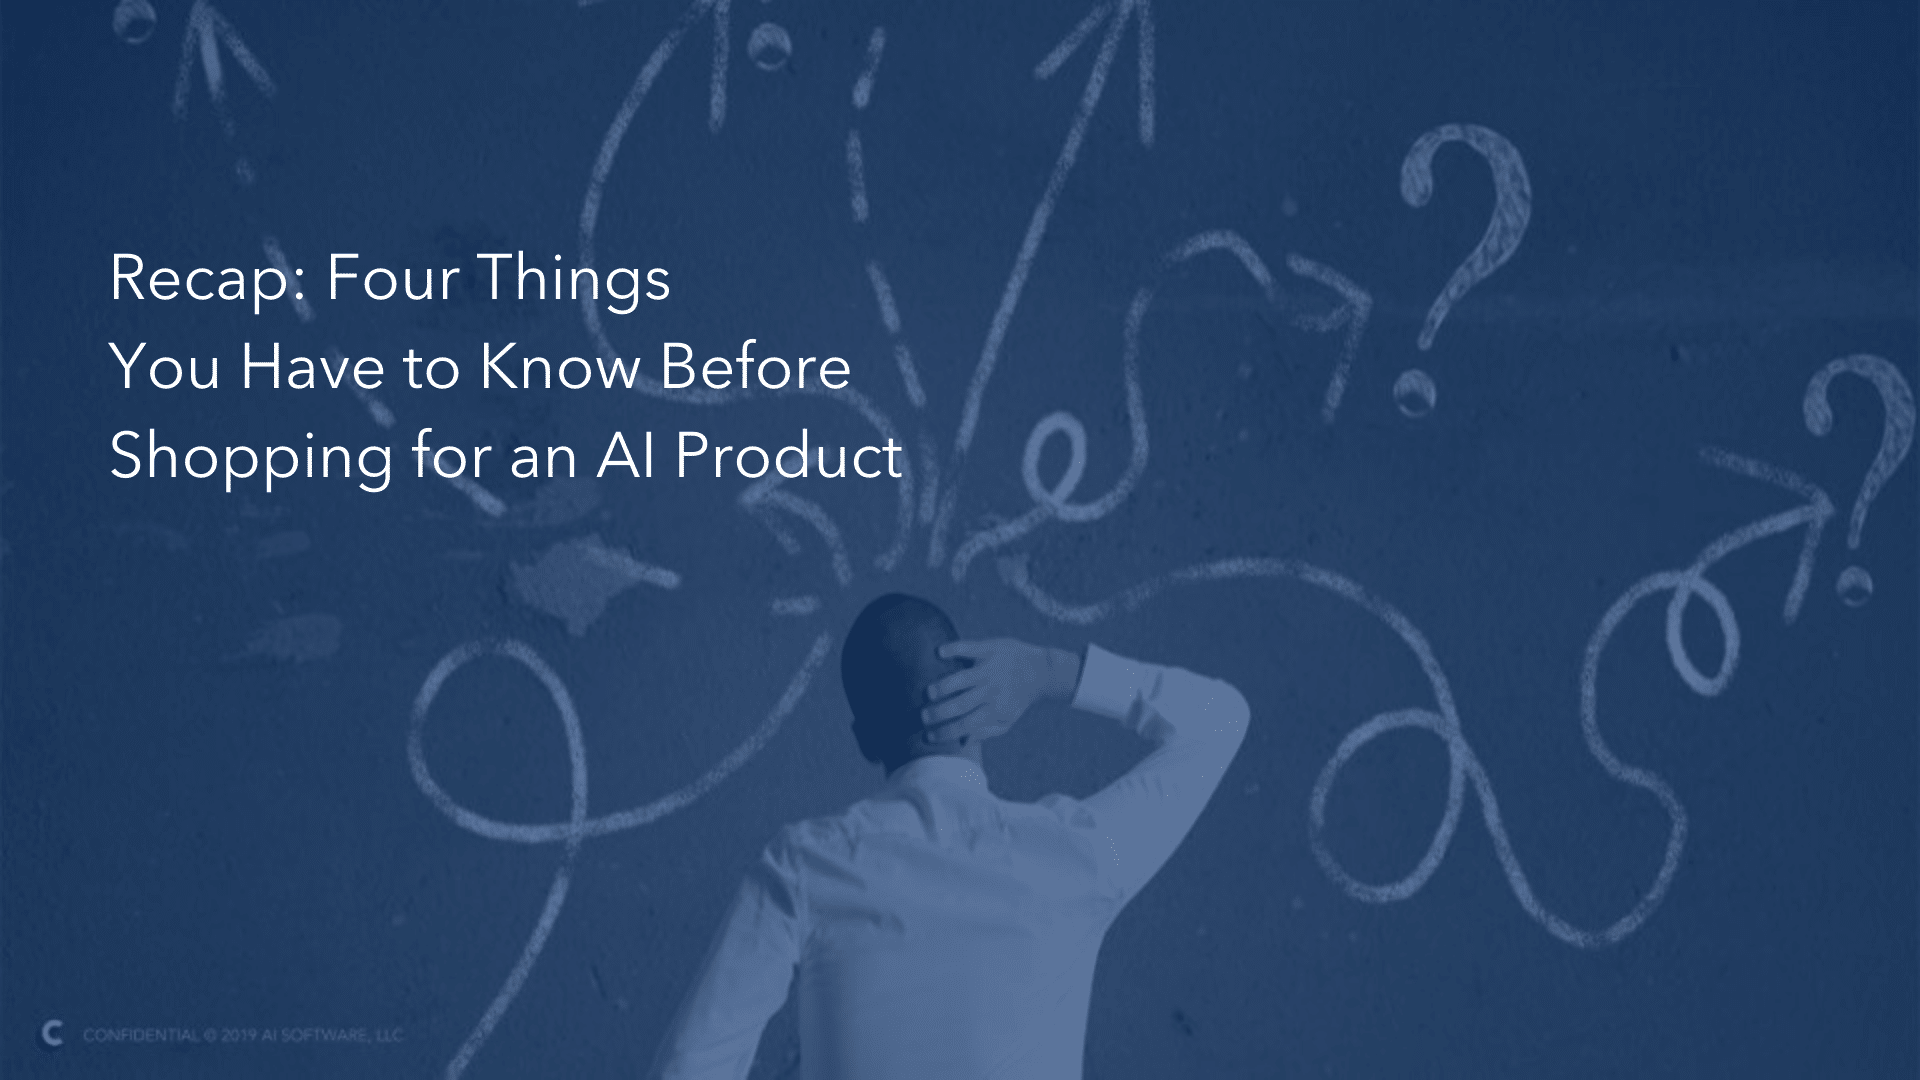 Recap: Four Things You Have to Know Before Shopping for an AI Product